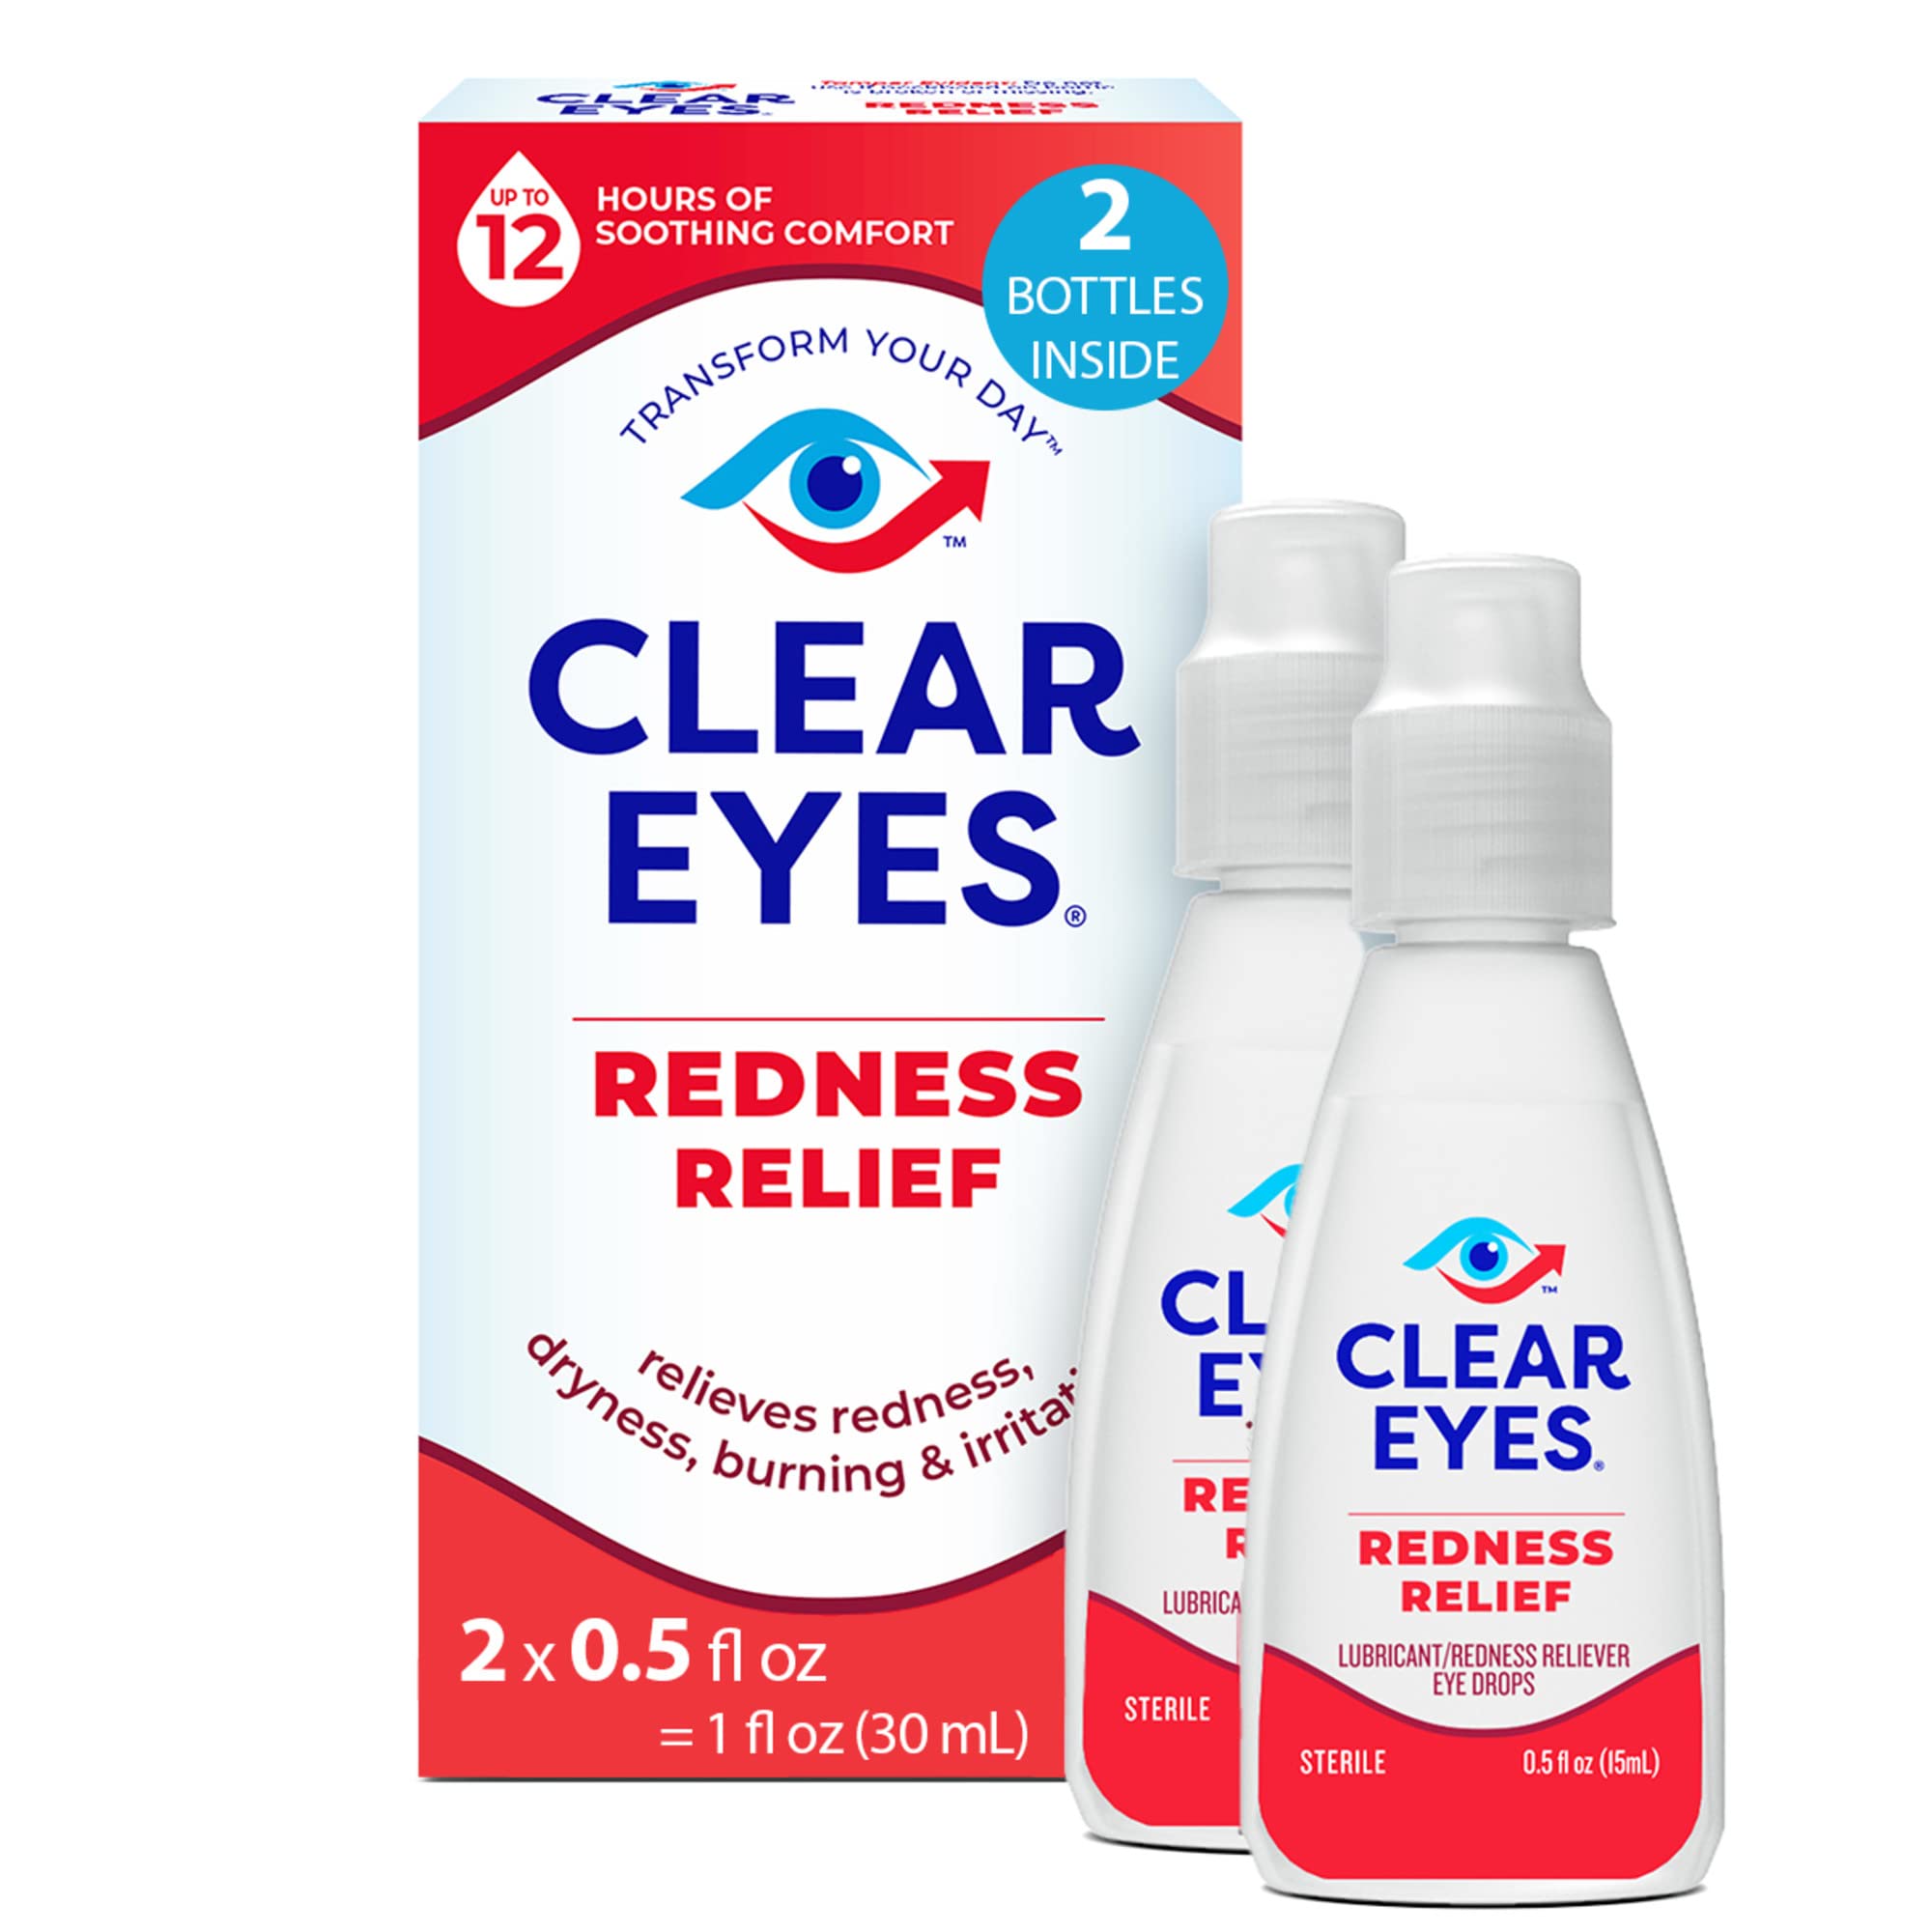 Clear Eyes Redness Relief Eye Drops, 0.5 oz, Dual Pack - $2.87